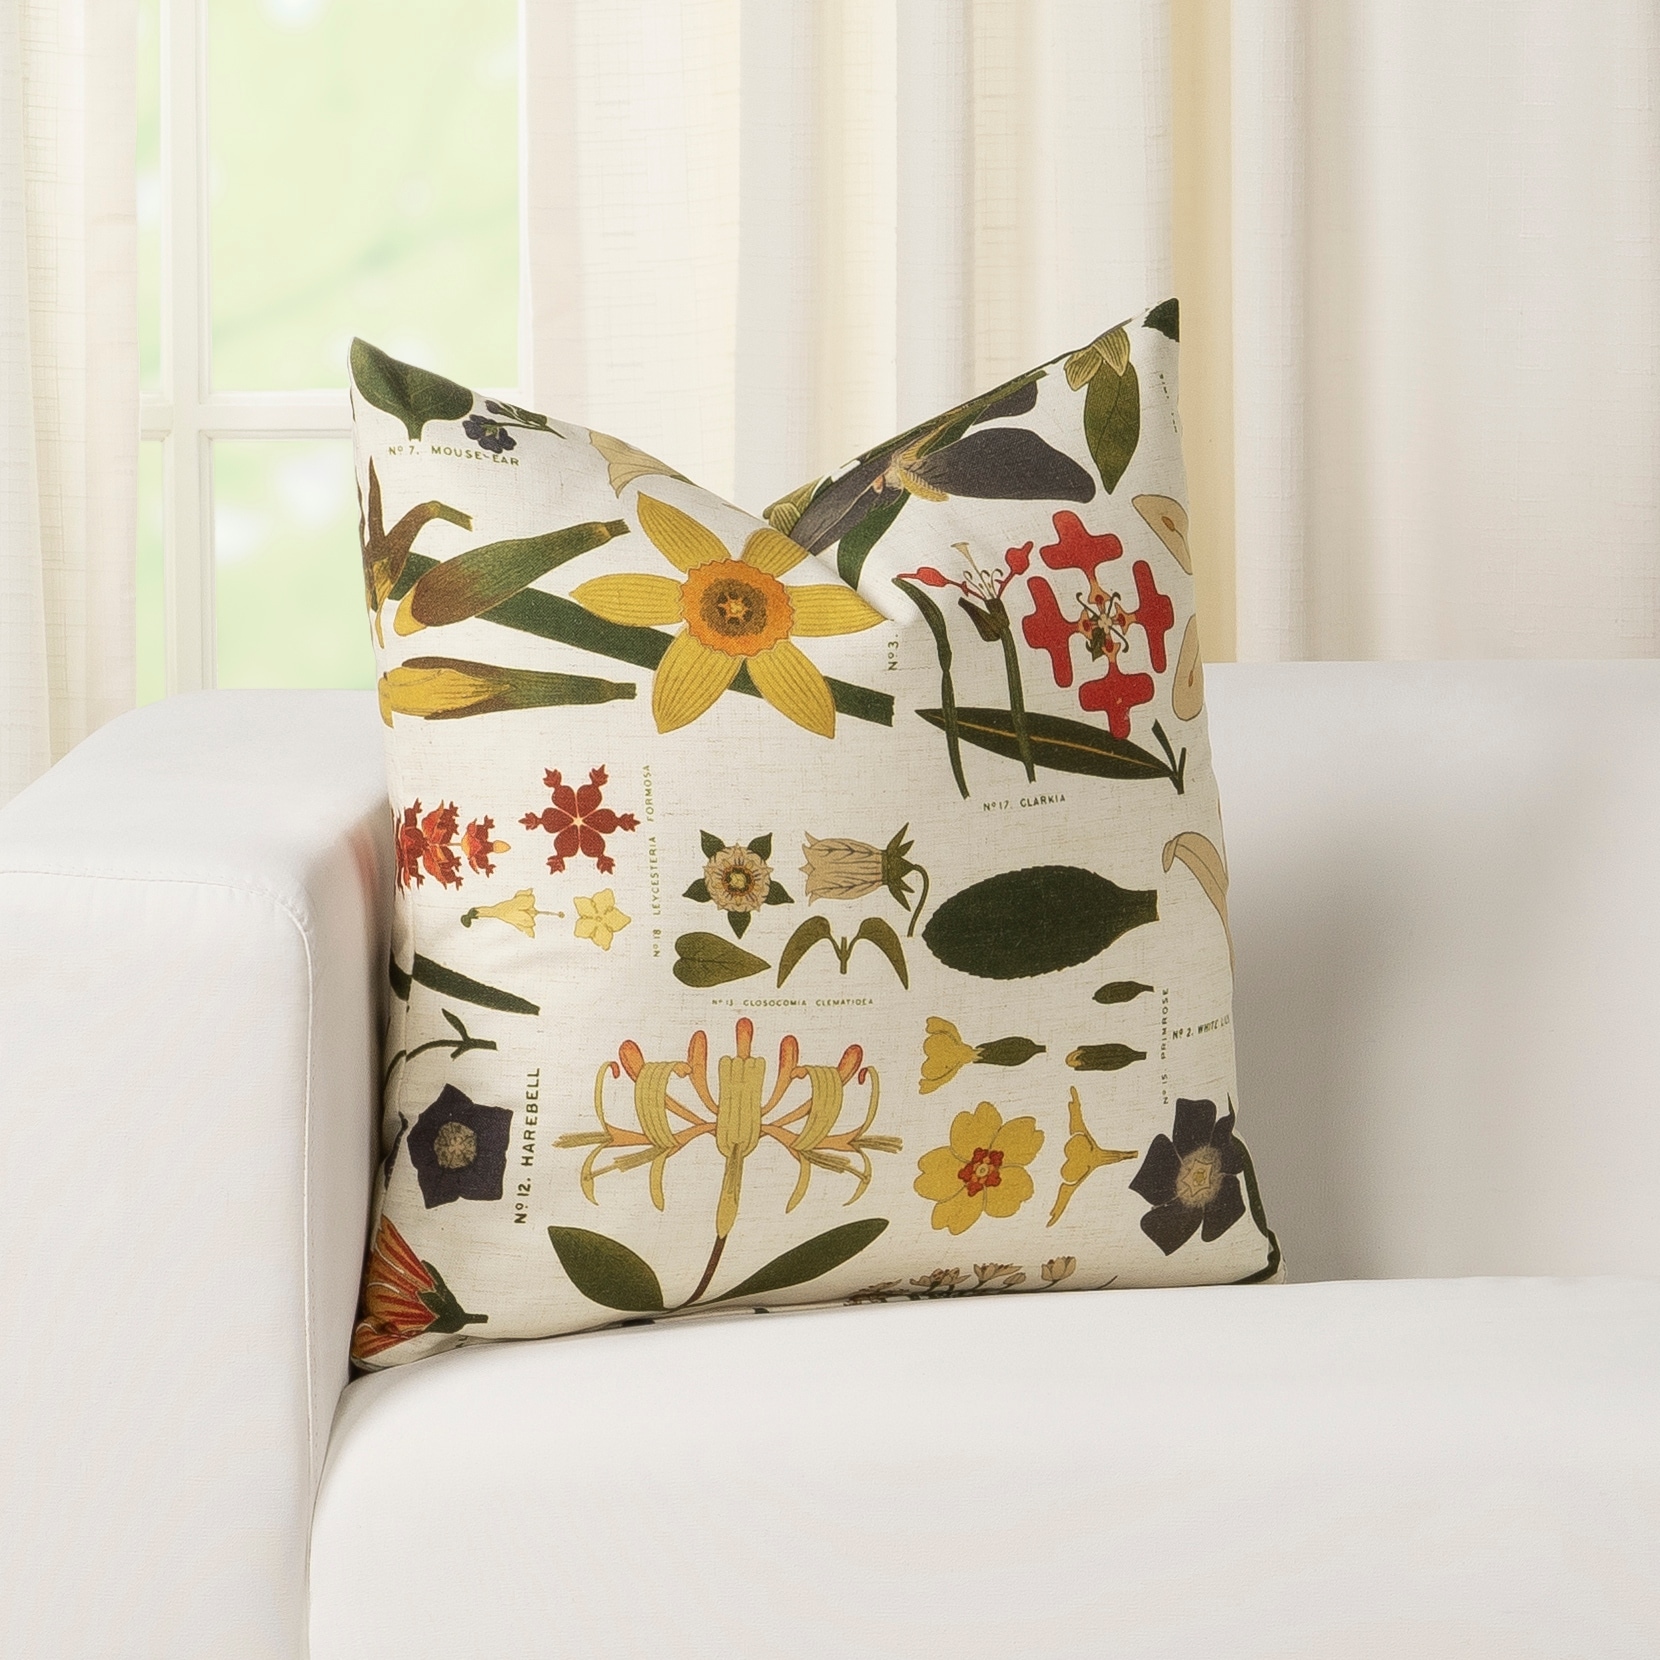 https://ak1.ostkcdn.com/images/products/is/images/direct/f4664d32451abd8c6214988eeb29631f60277027/Smithsonian-Take-Root-Floral-Throw-Pillow.jpg